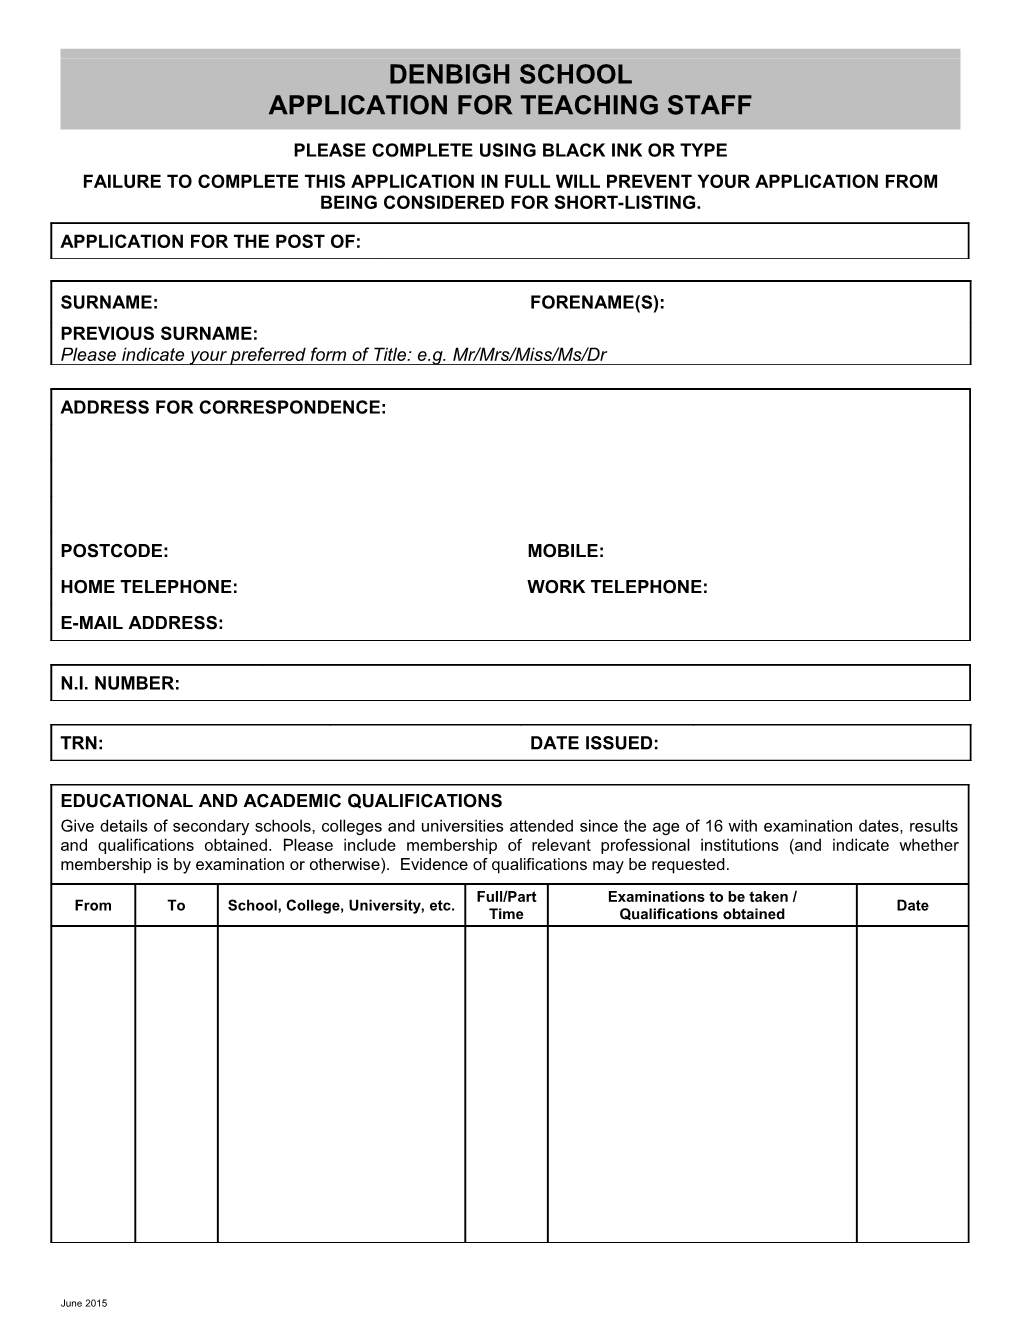 Application for Teaching Staff